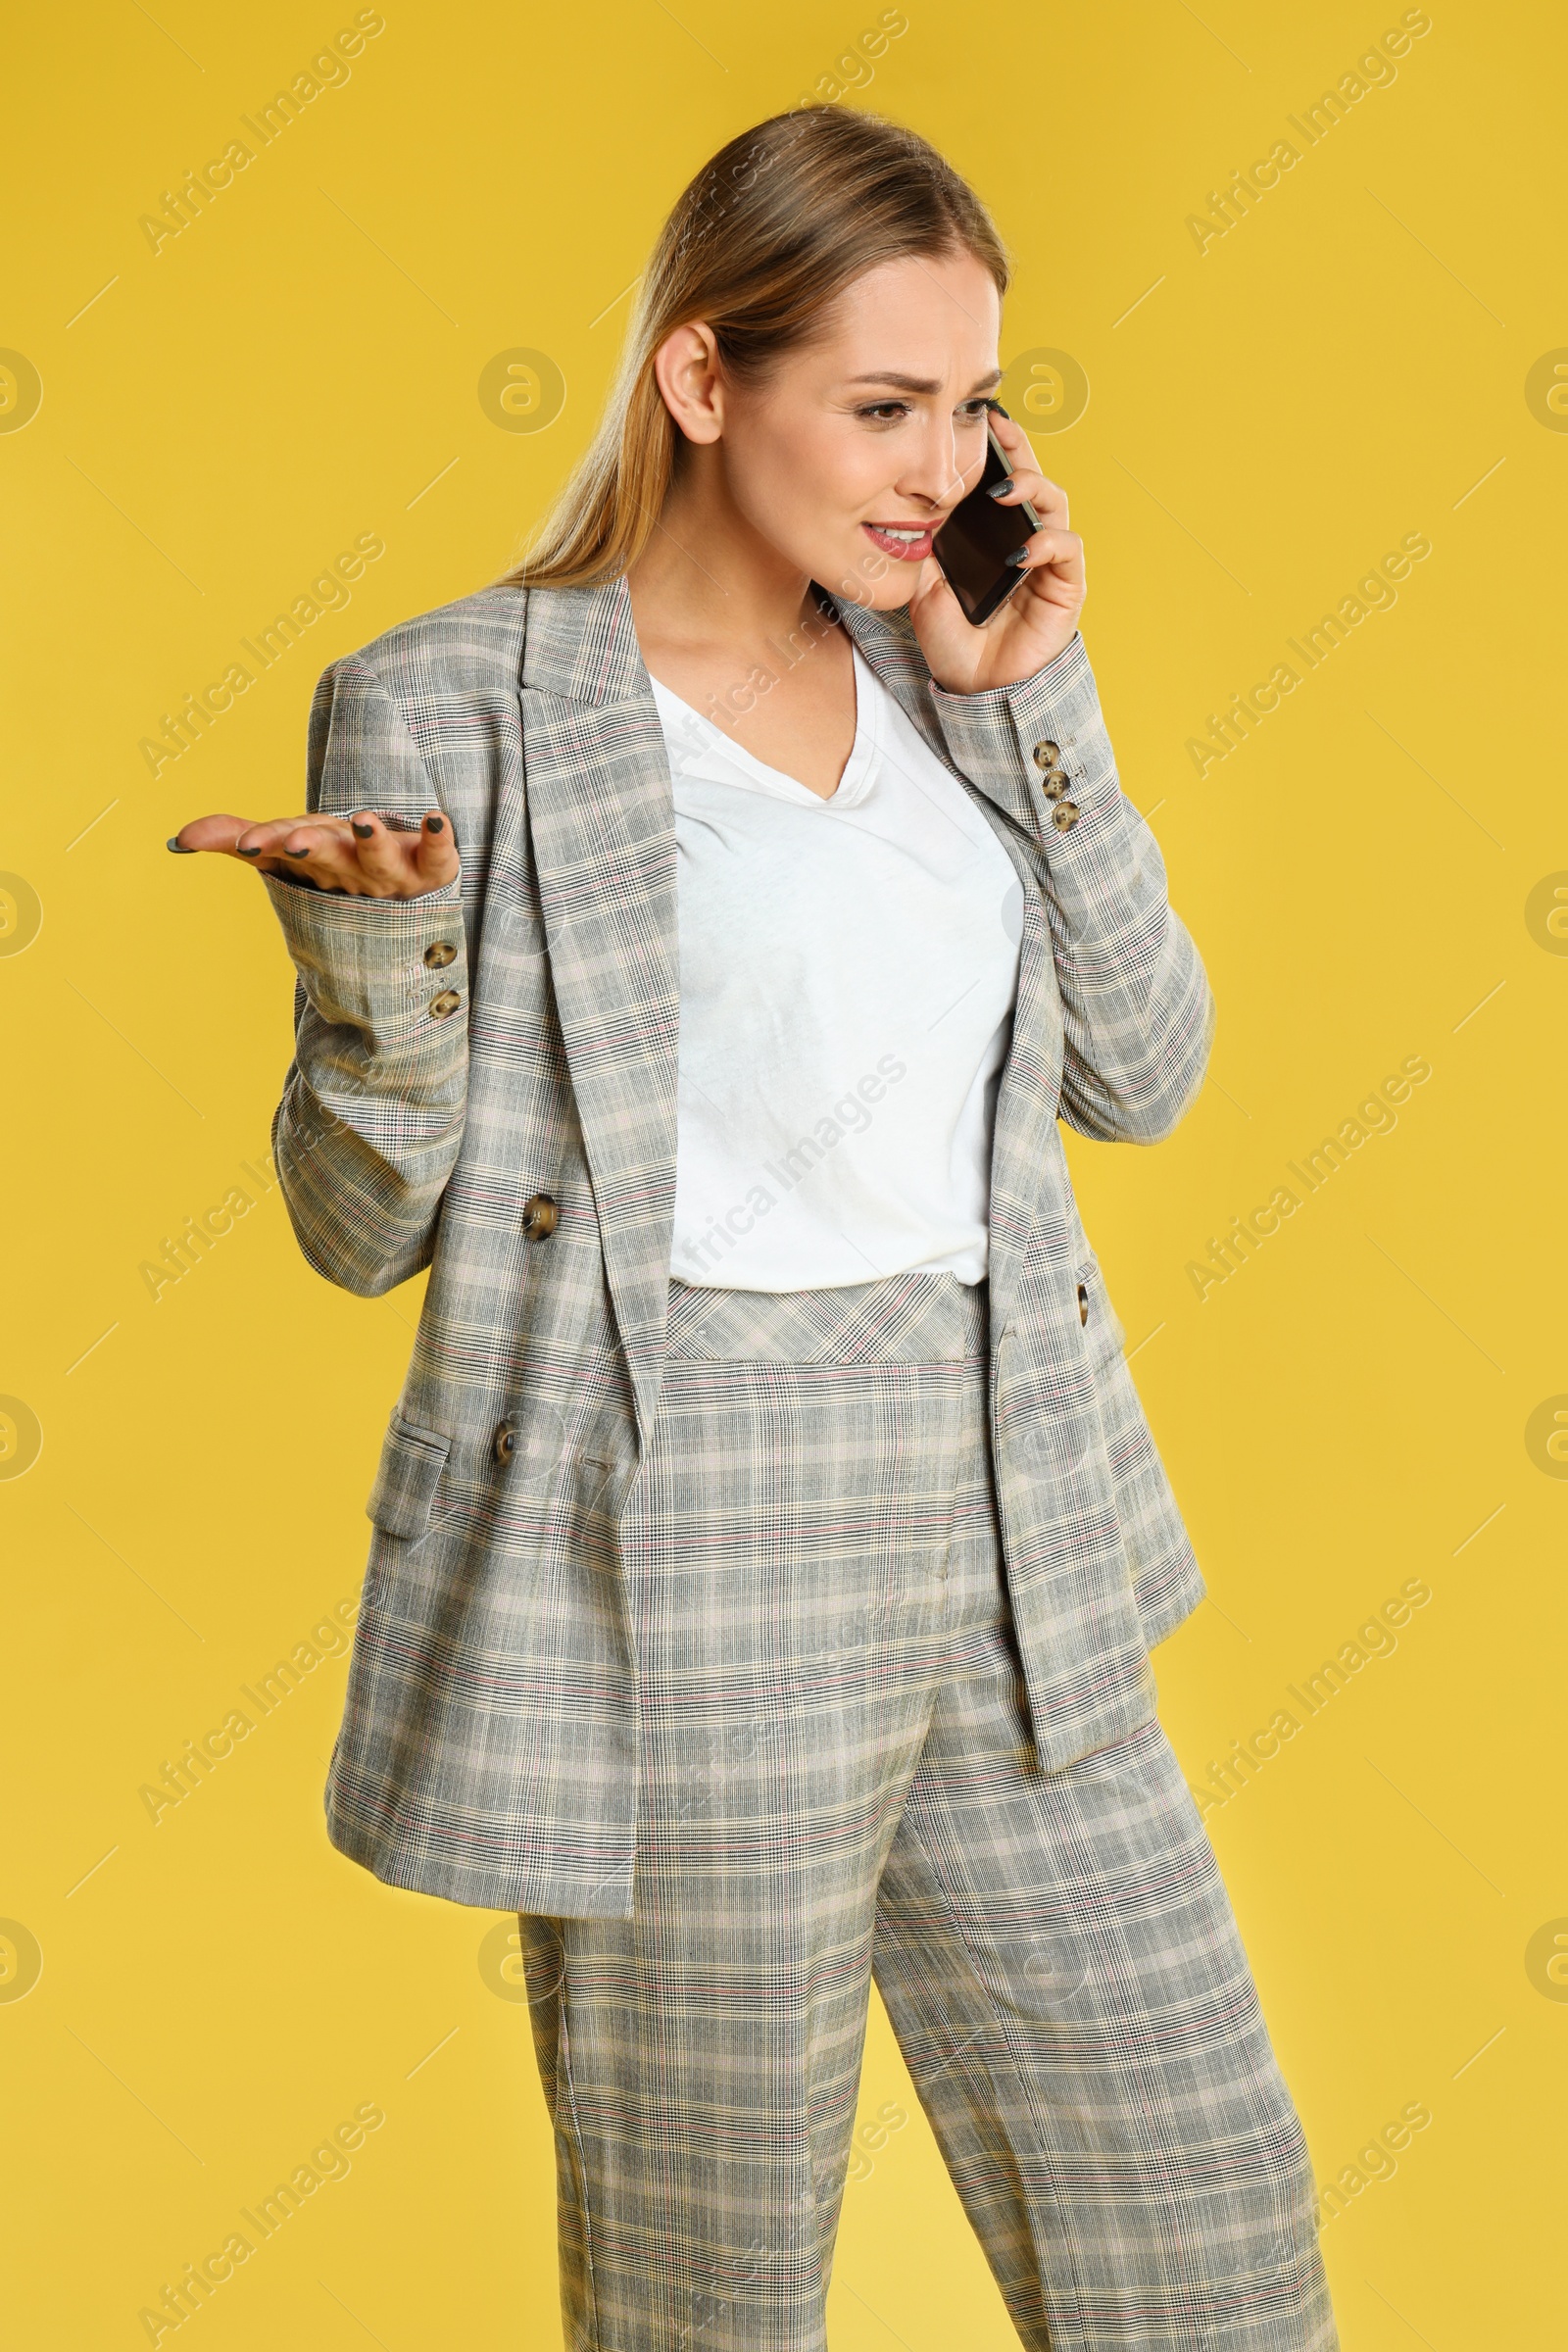 Photo of Emotional woman talking on smartphone against yellow background